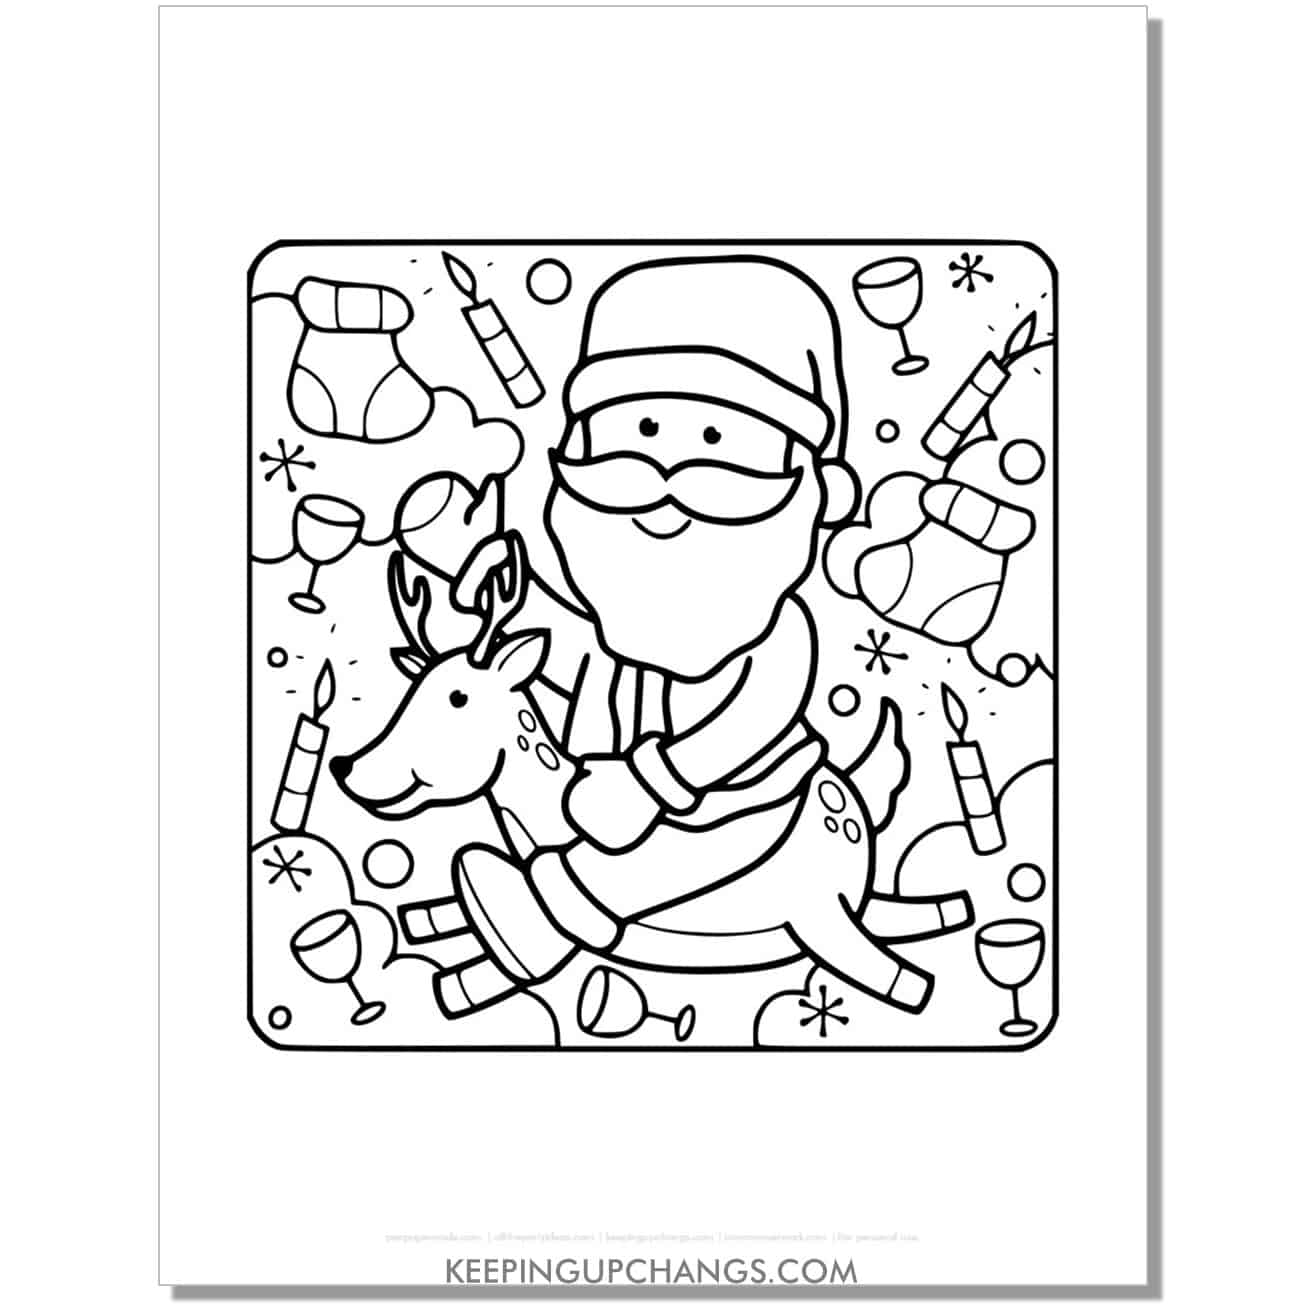 free detailed santa riding rudolph reindeer coloring page.